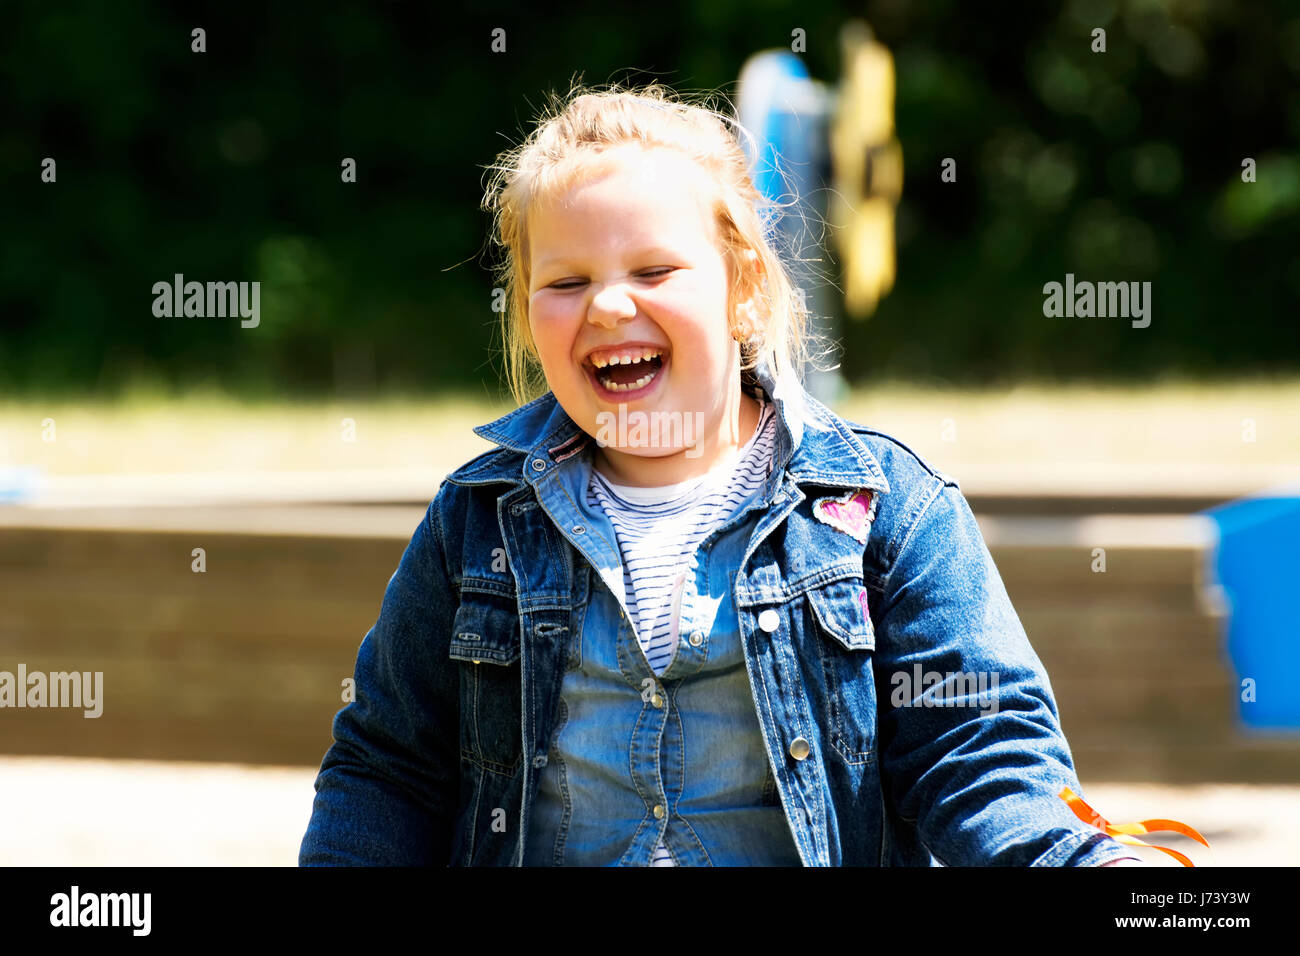 Happy little girl at playground Stock Photo